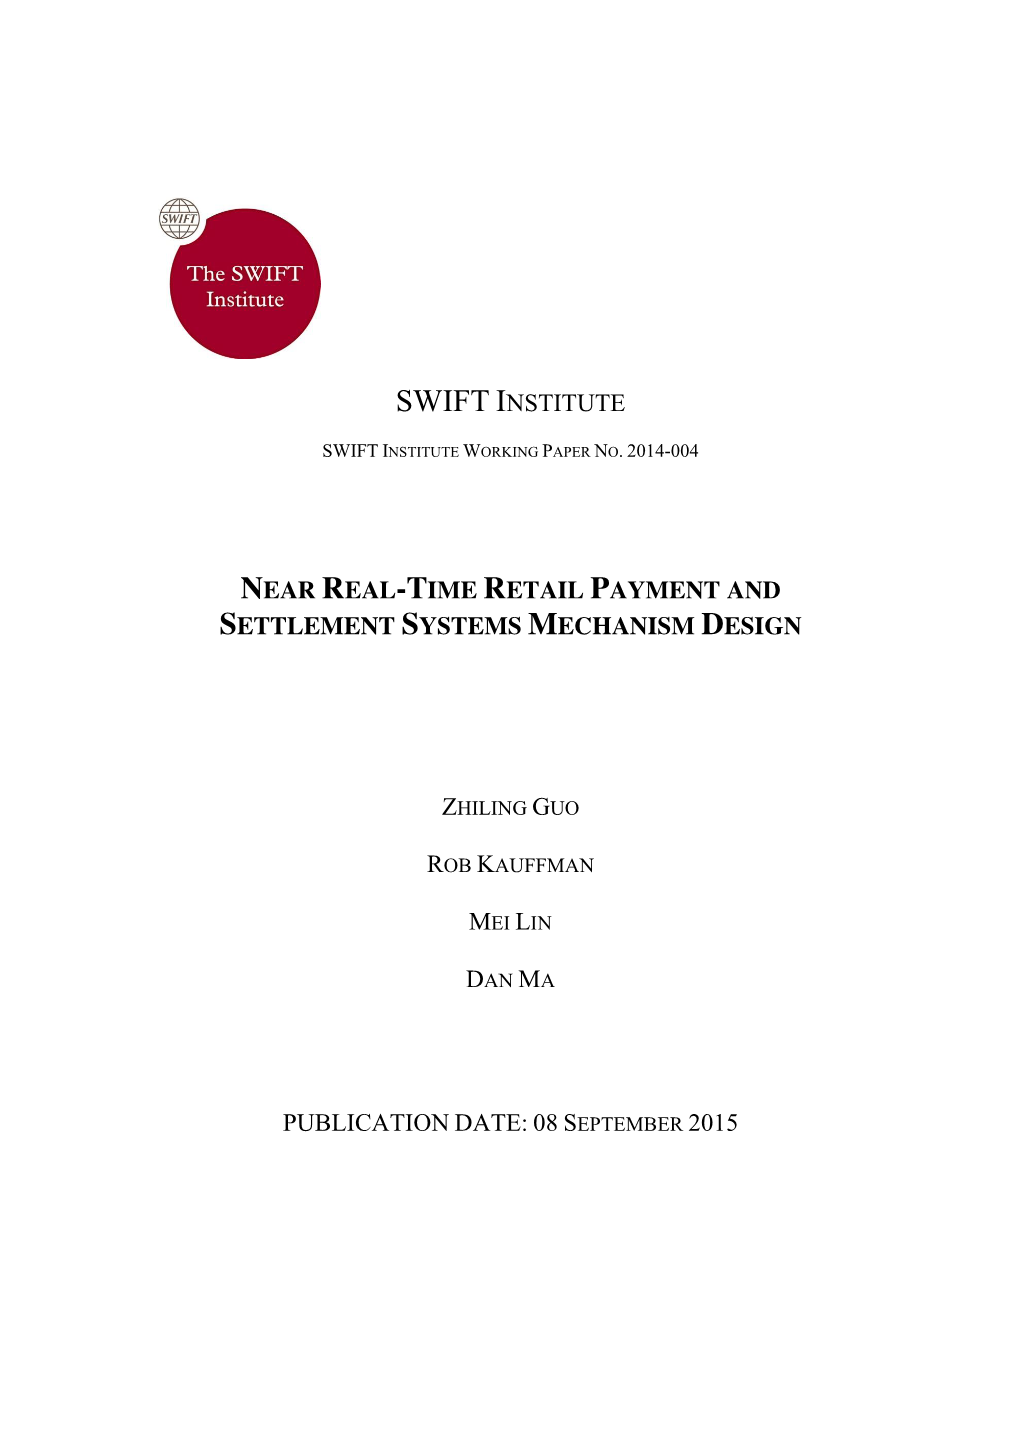 Near Real-Time Retail Payment and Settlement Systems Mechanism Design